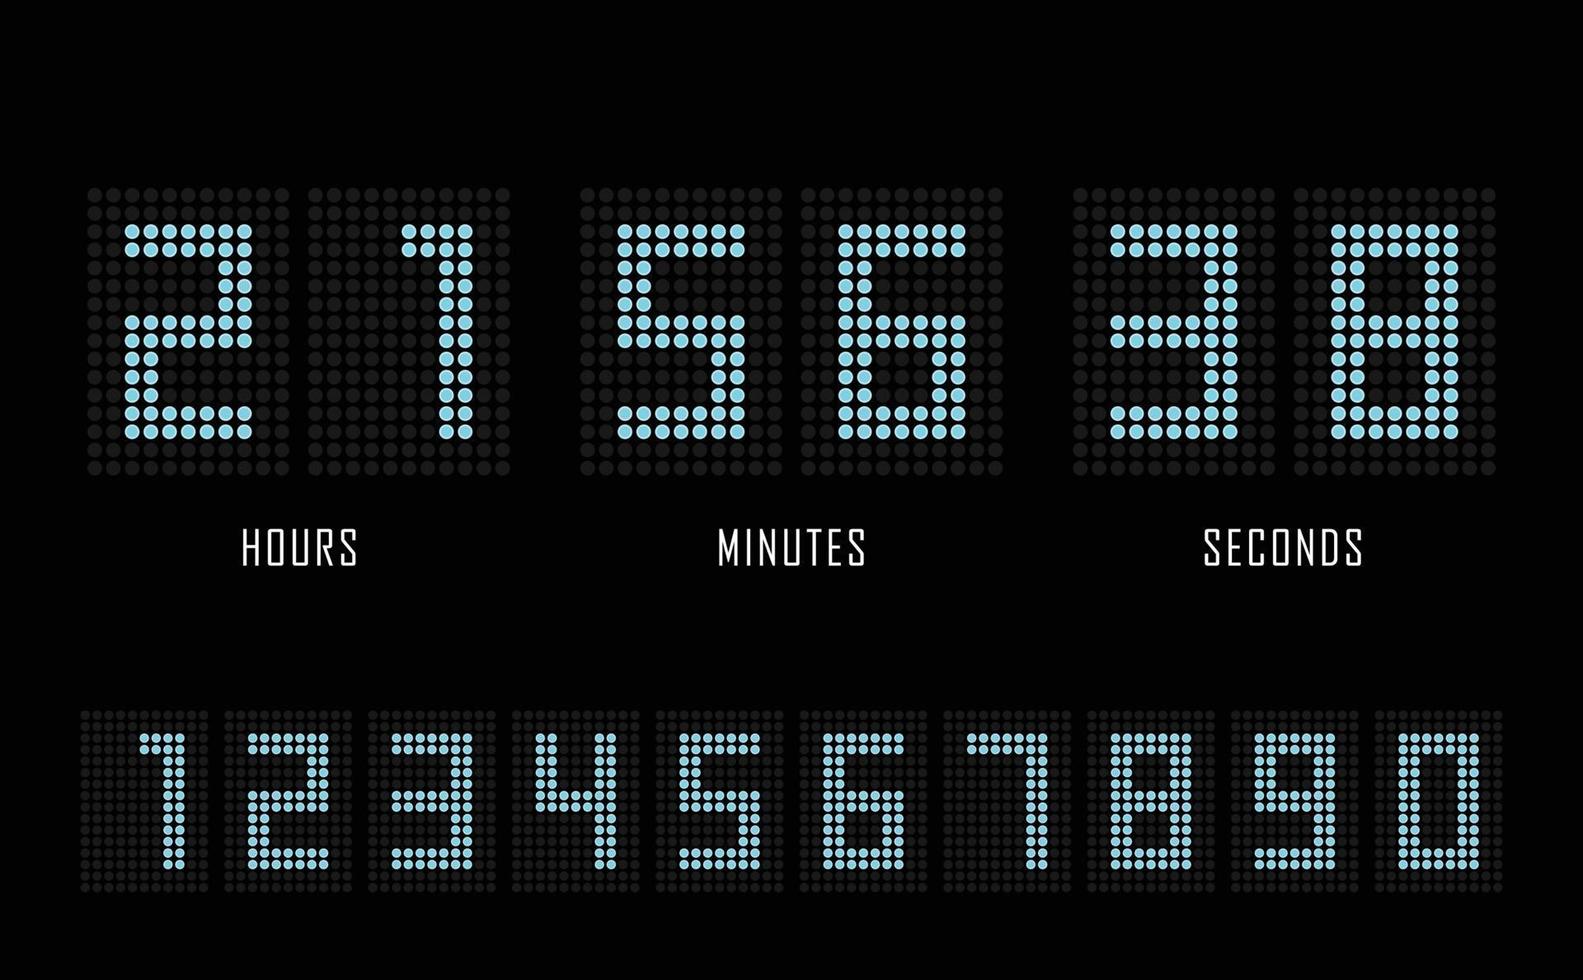 https://static.vecteezy.com/system/resources/previews/001/958/537/non_2x/countdown-website-flat-template-digital-clock-timer-background-vector.jpg